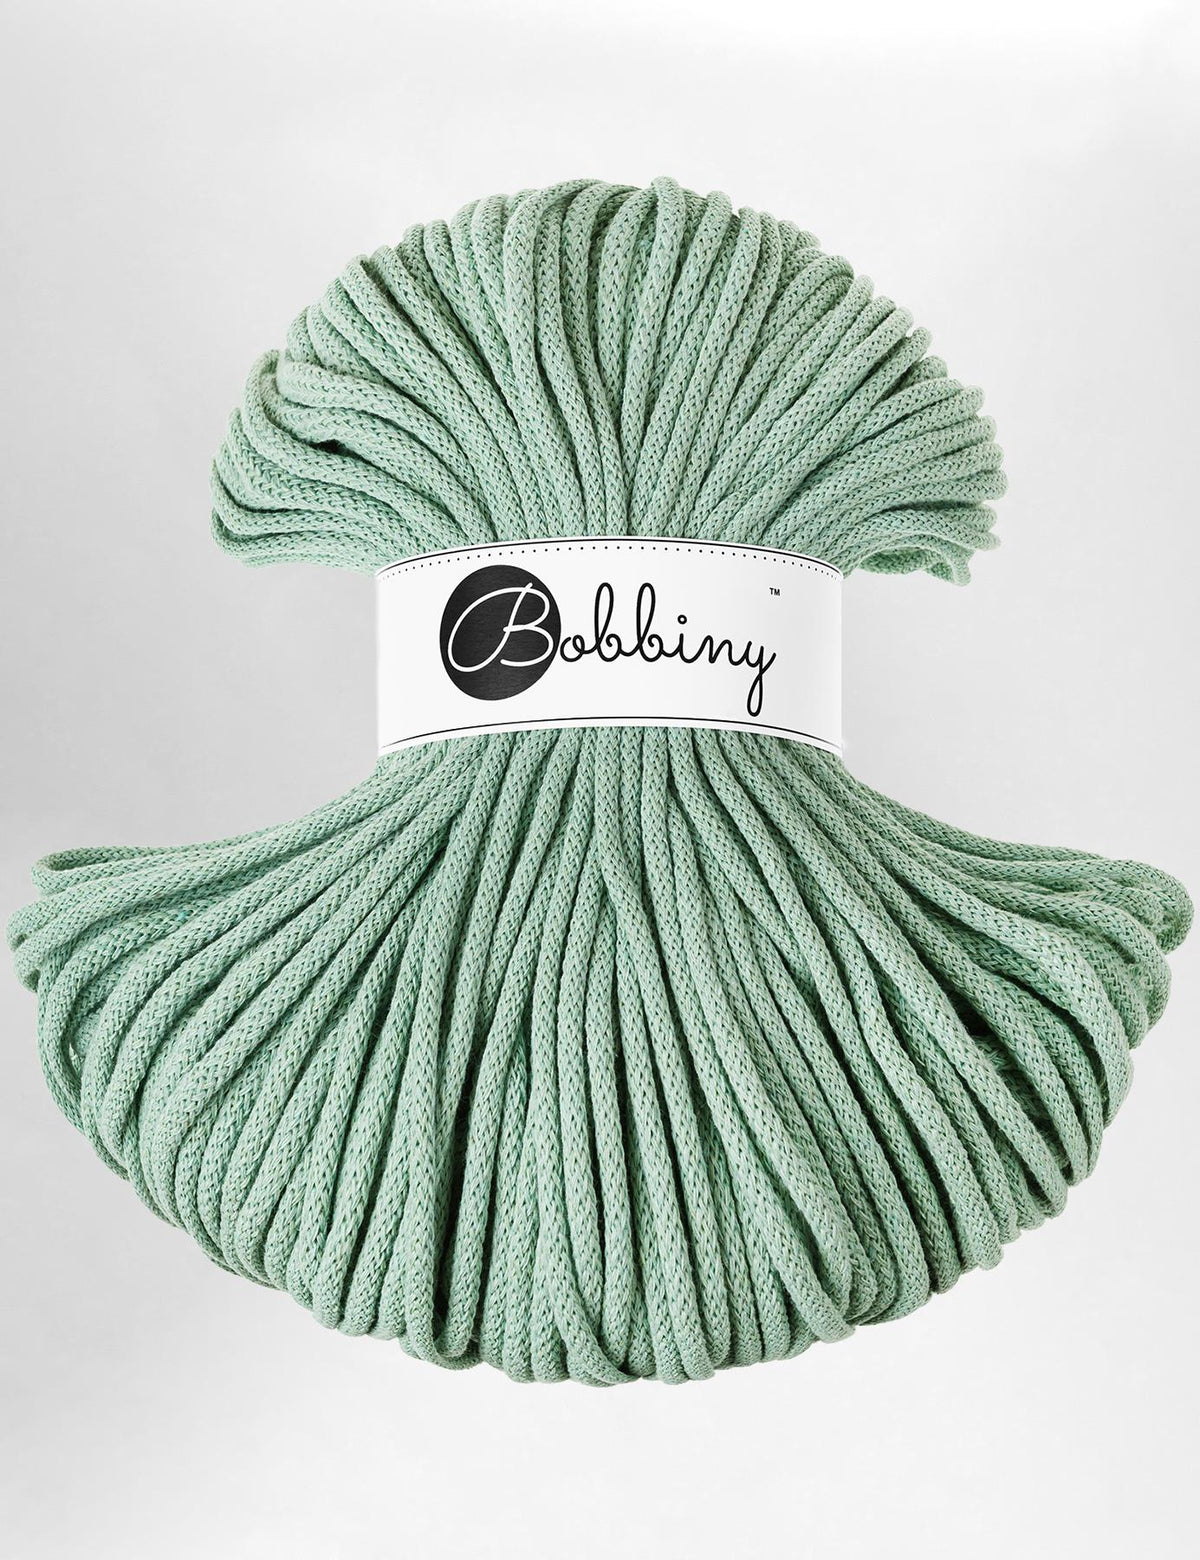 5mm Aloe recycled cotton macrame cord by Bobbiny (100m)